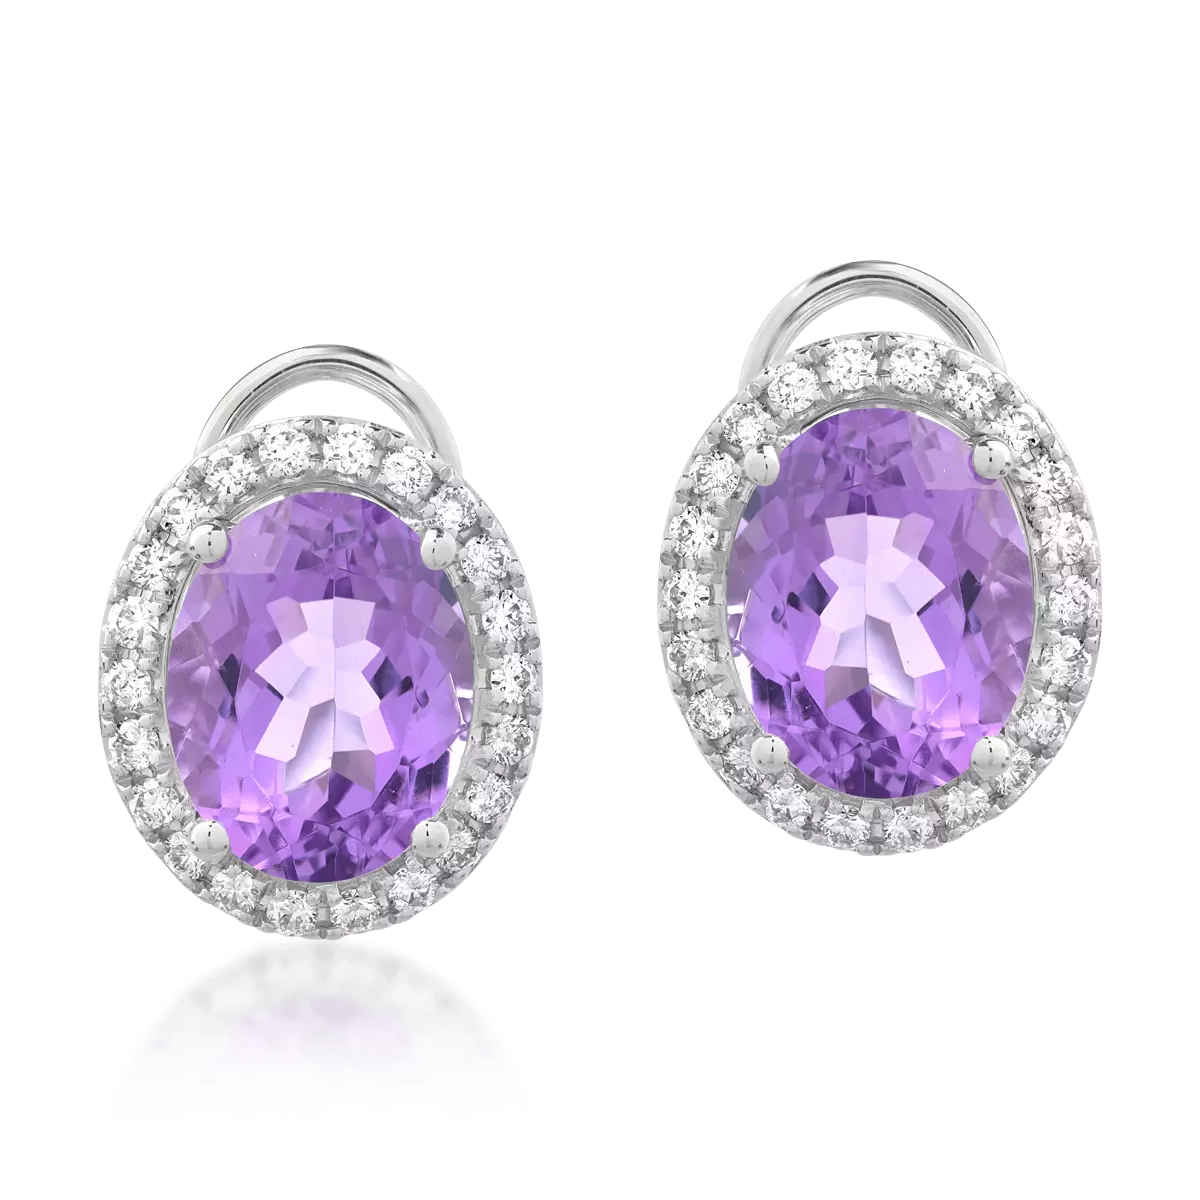 18K white gold earrings with 3.79ct amethysts and 0.305ct diamonds